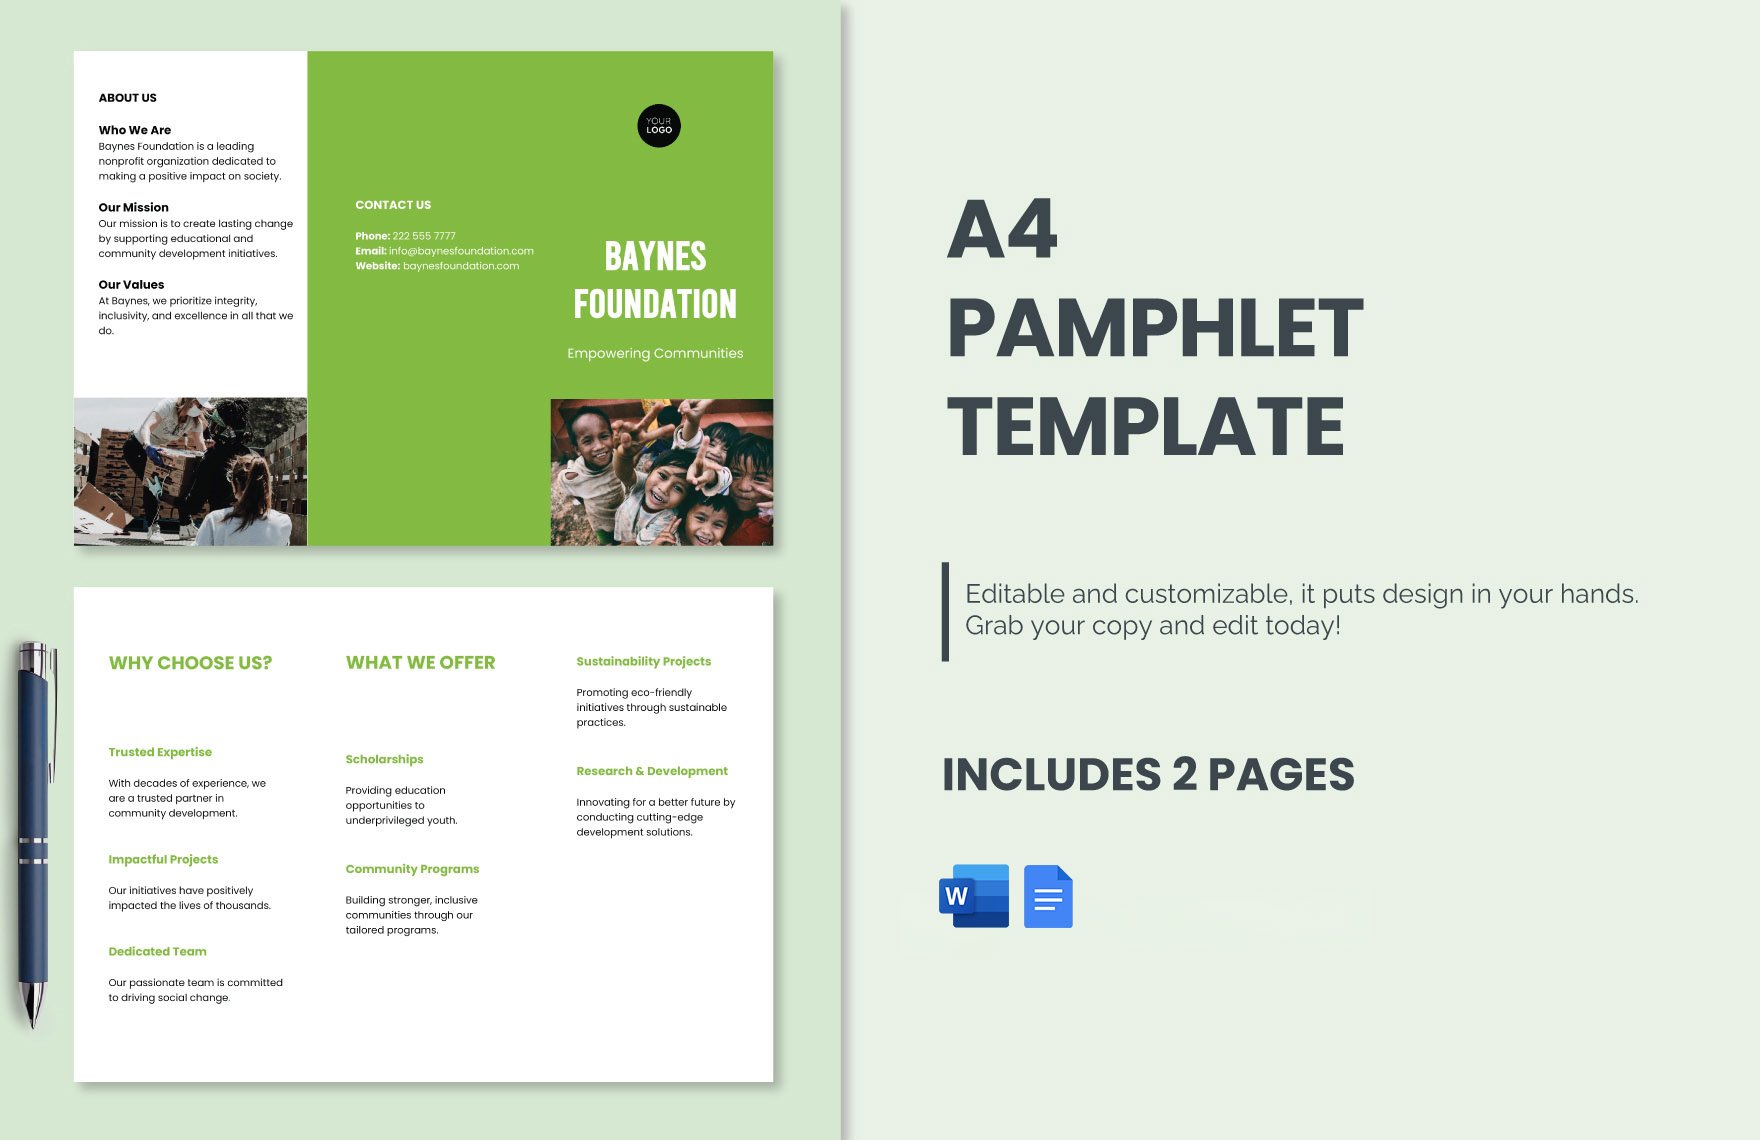 A4 Pamphlet Template